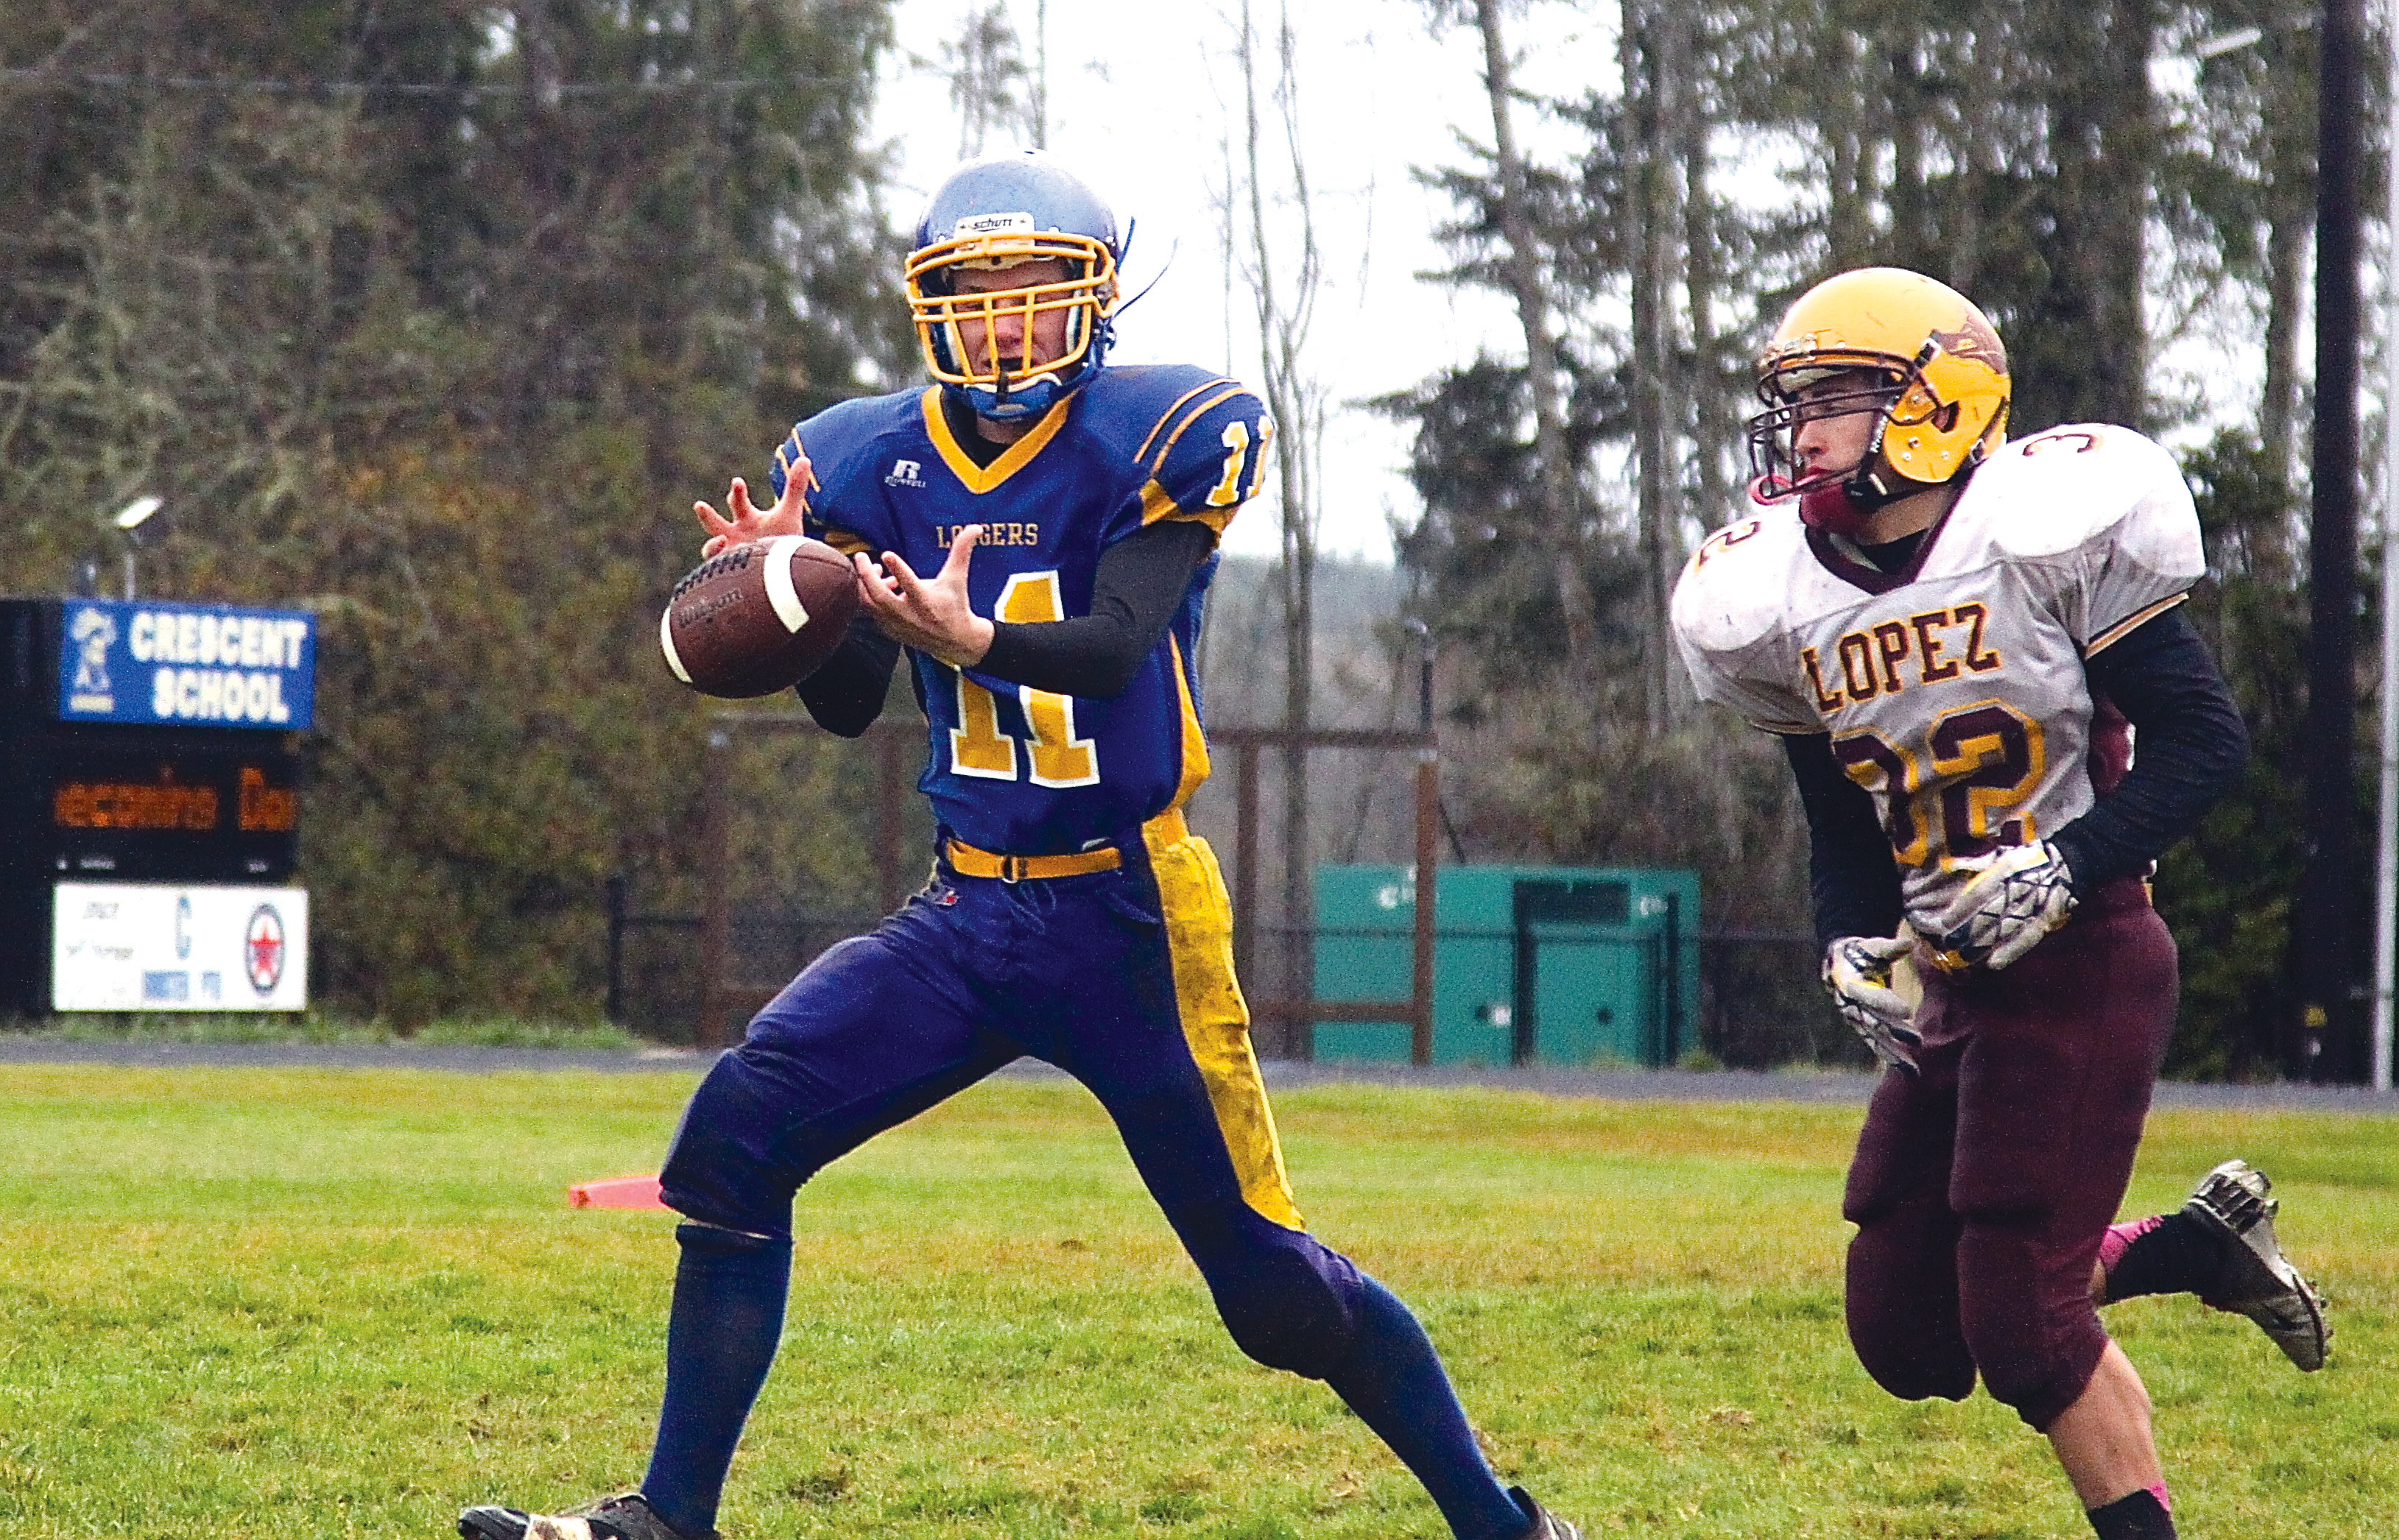 Crescent receiver Martin Waldrip (11) just misses a pass as Lopez defender Harrison Goodrich (32) closes in. The Loggers ended their season with a 56-6 loss. Dave Logan/for Peninsula Daily News